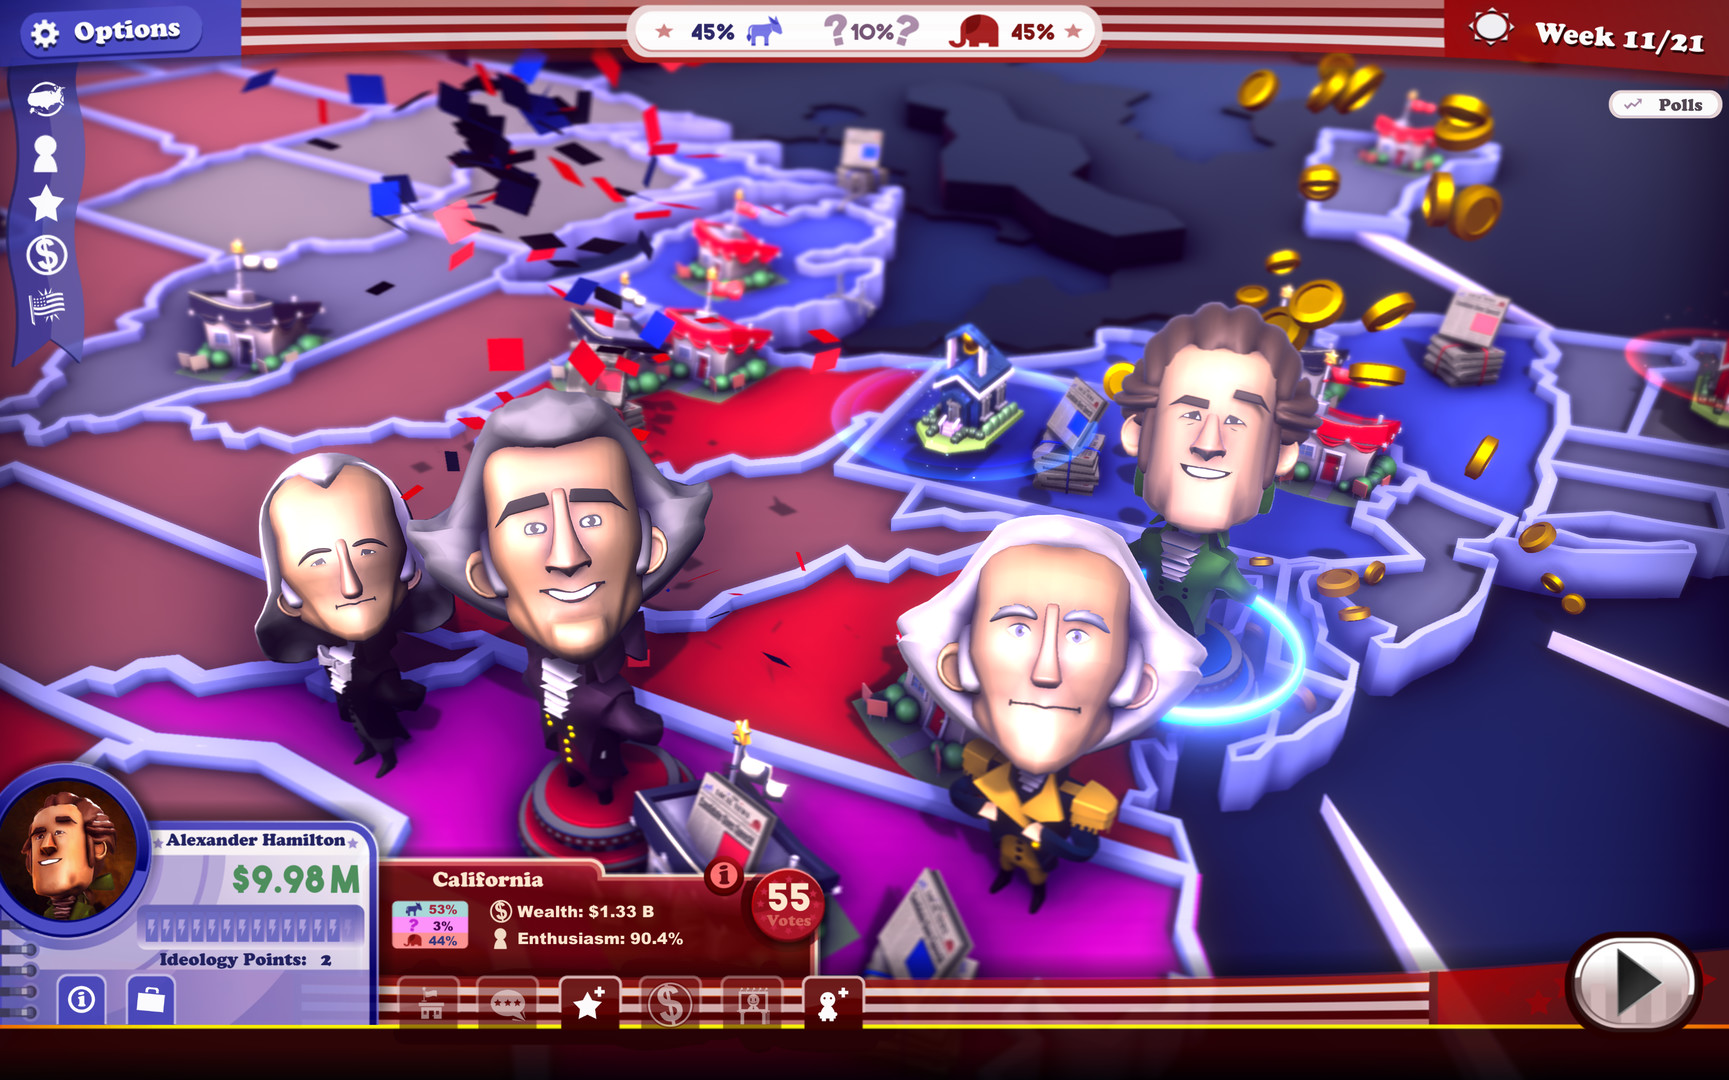 The Political Machine 2020 - The Founding Fathers DLC Featured Screenshot #1